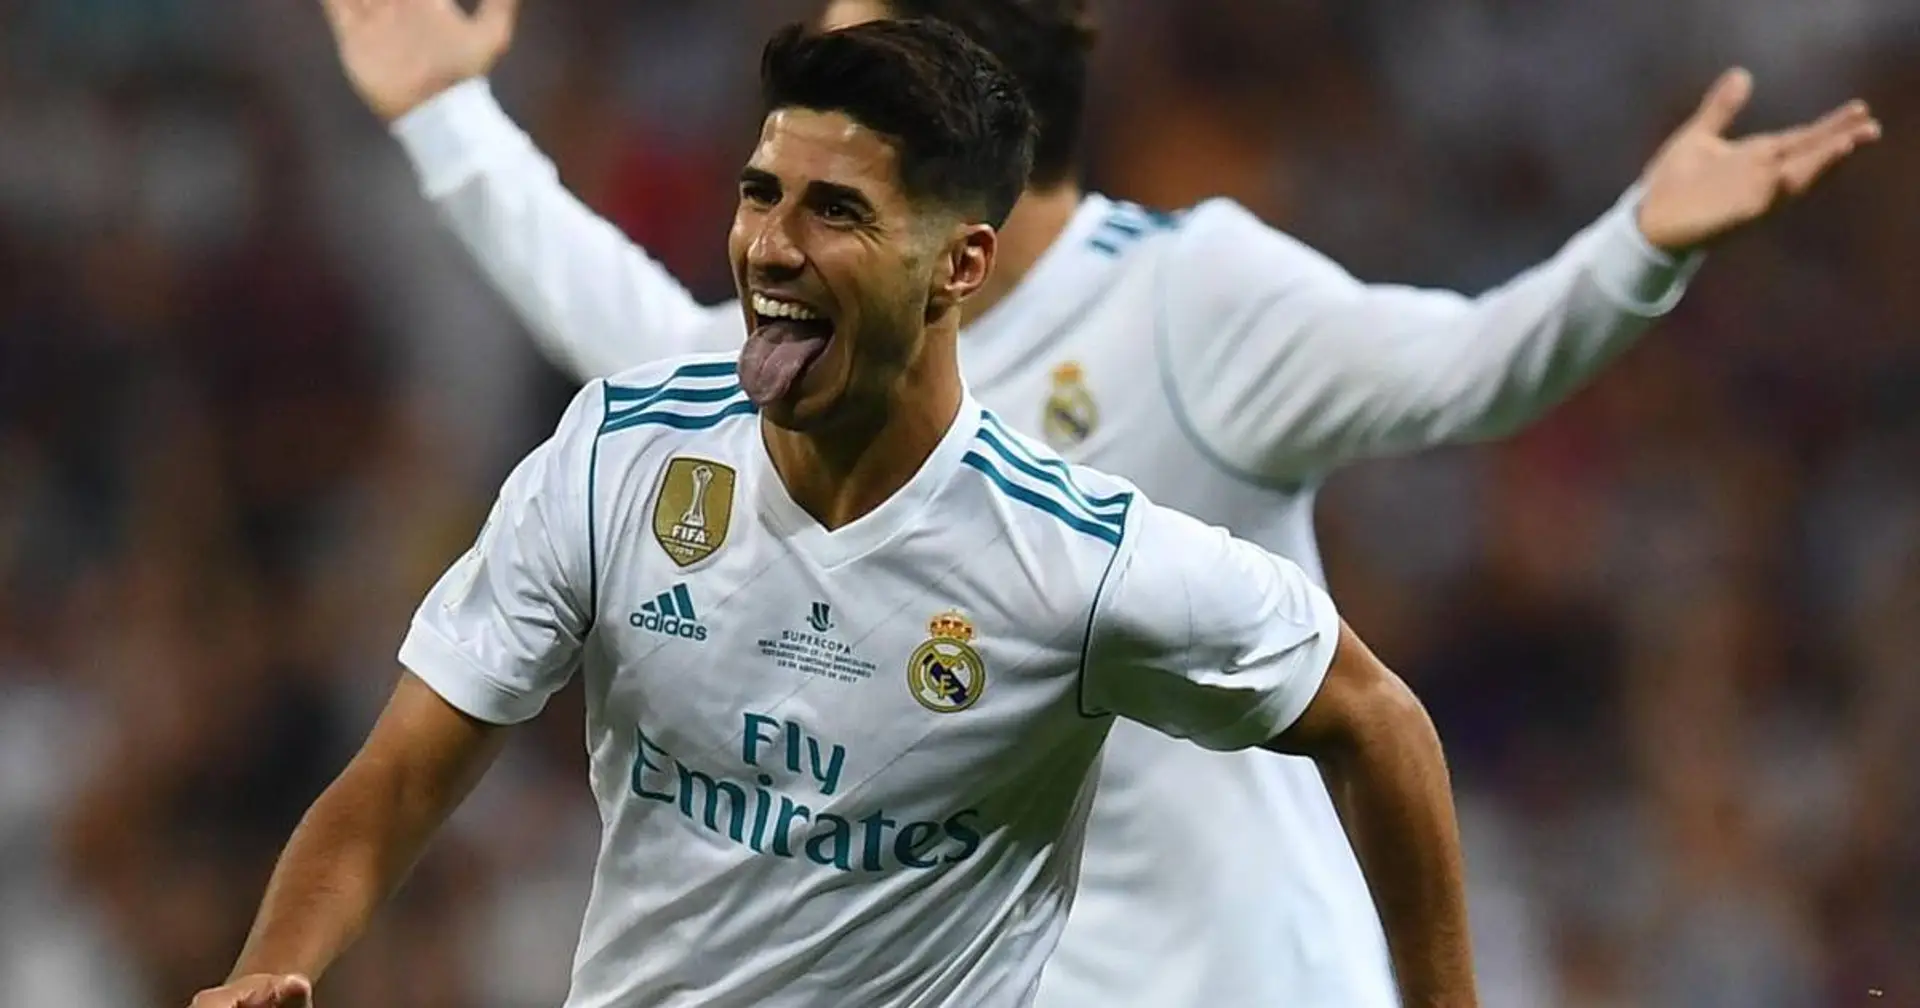 Asensio viewed as important part of Real Madrid's future: Diario AS